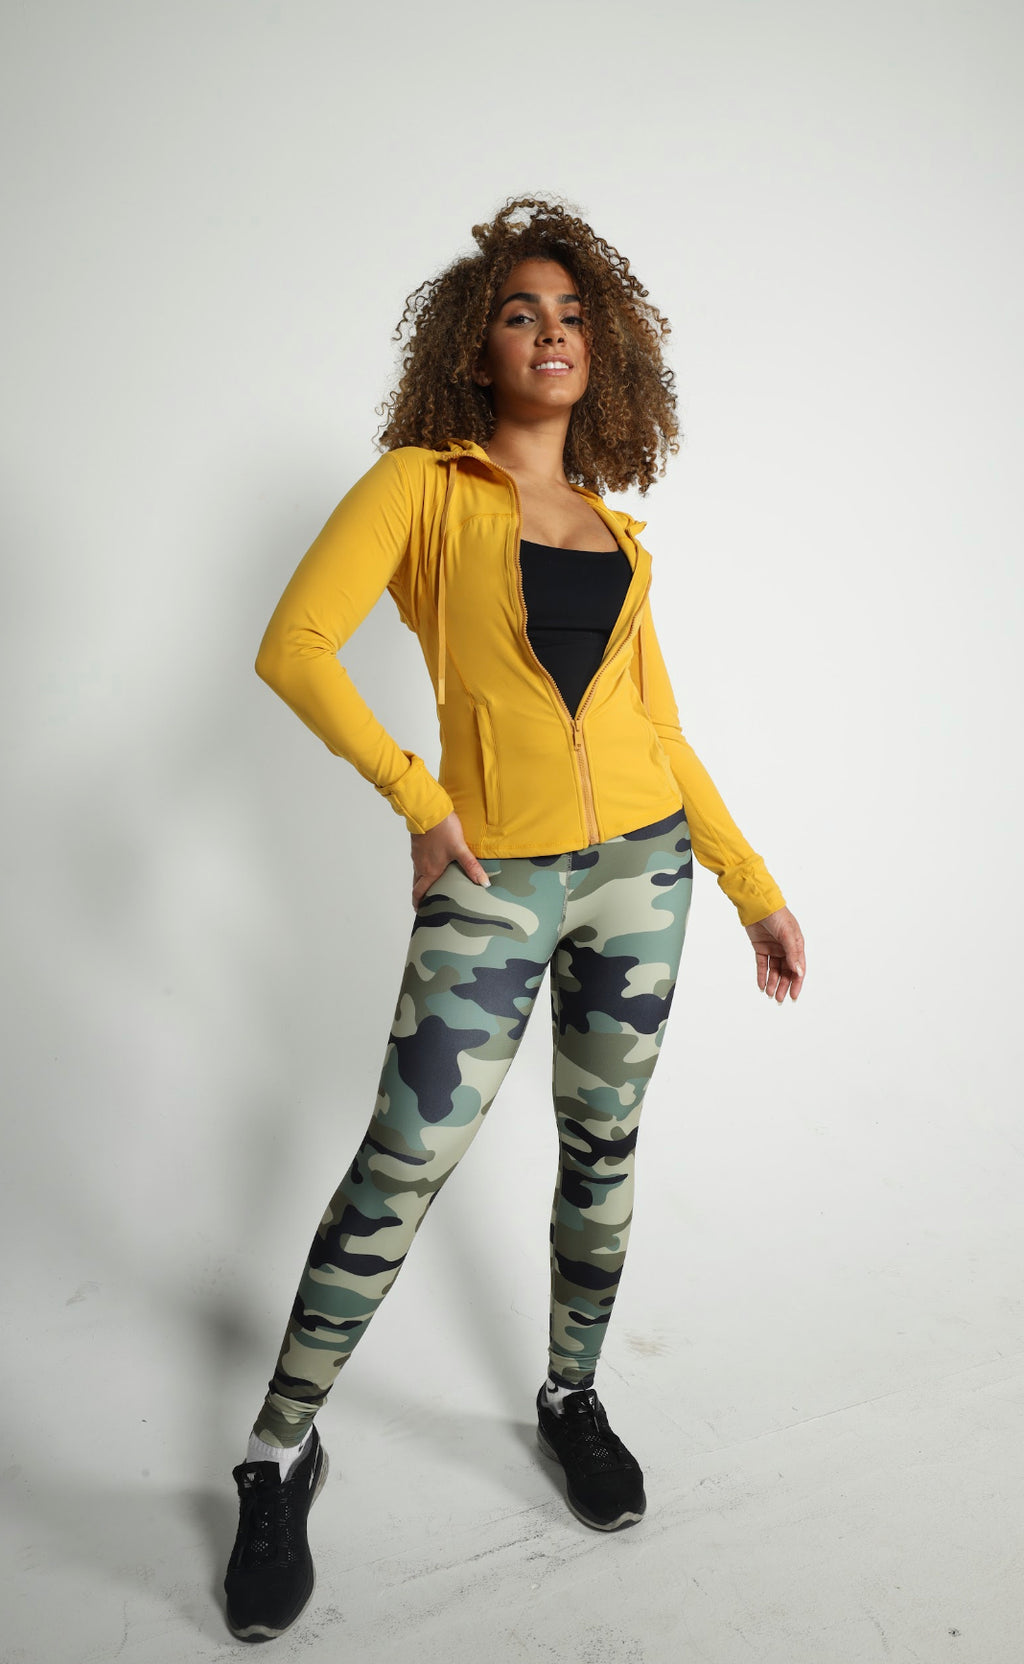 Camo leggings outfit  Outfits with leggings, Camo leggings outfit